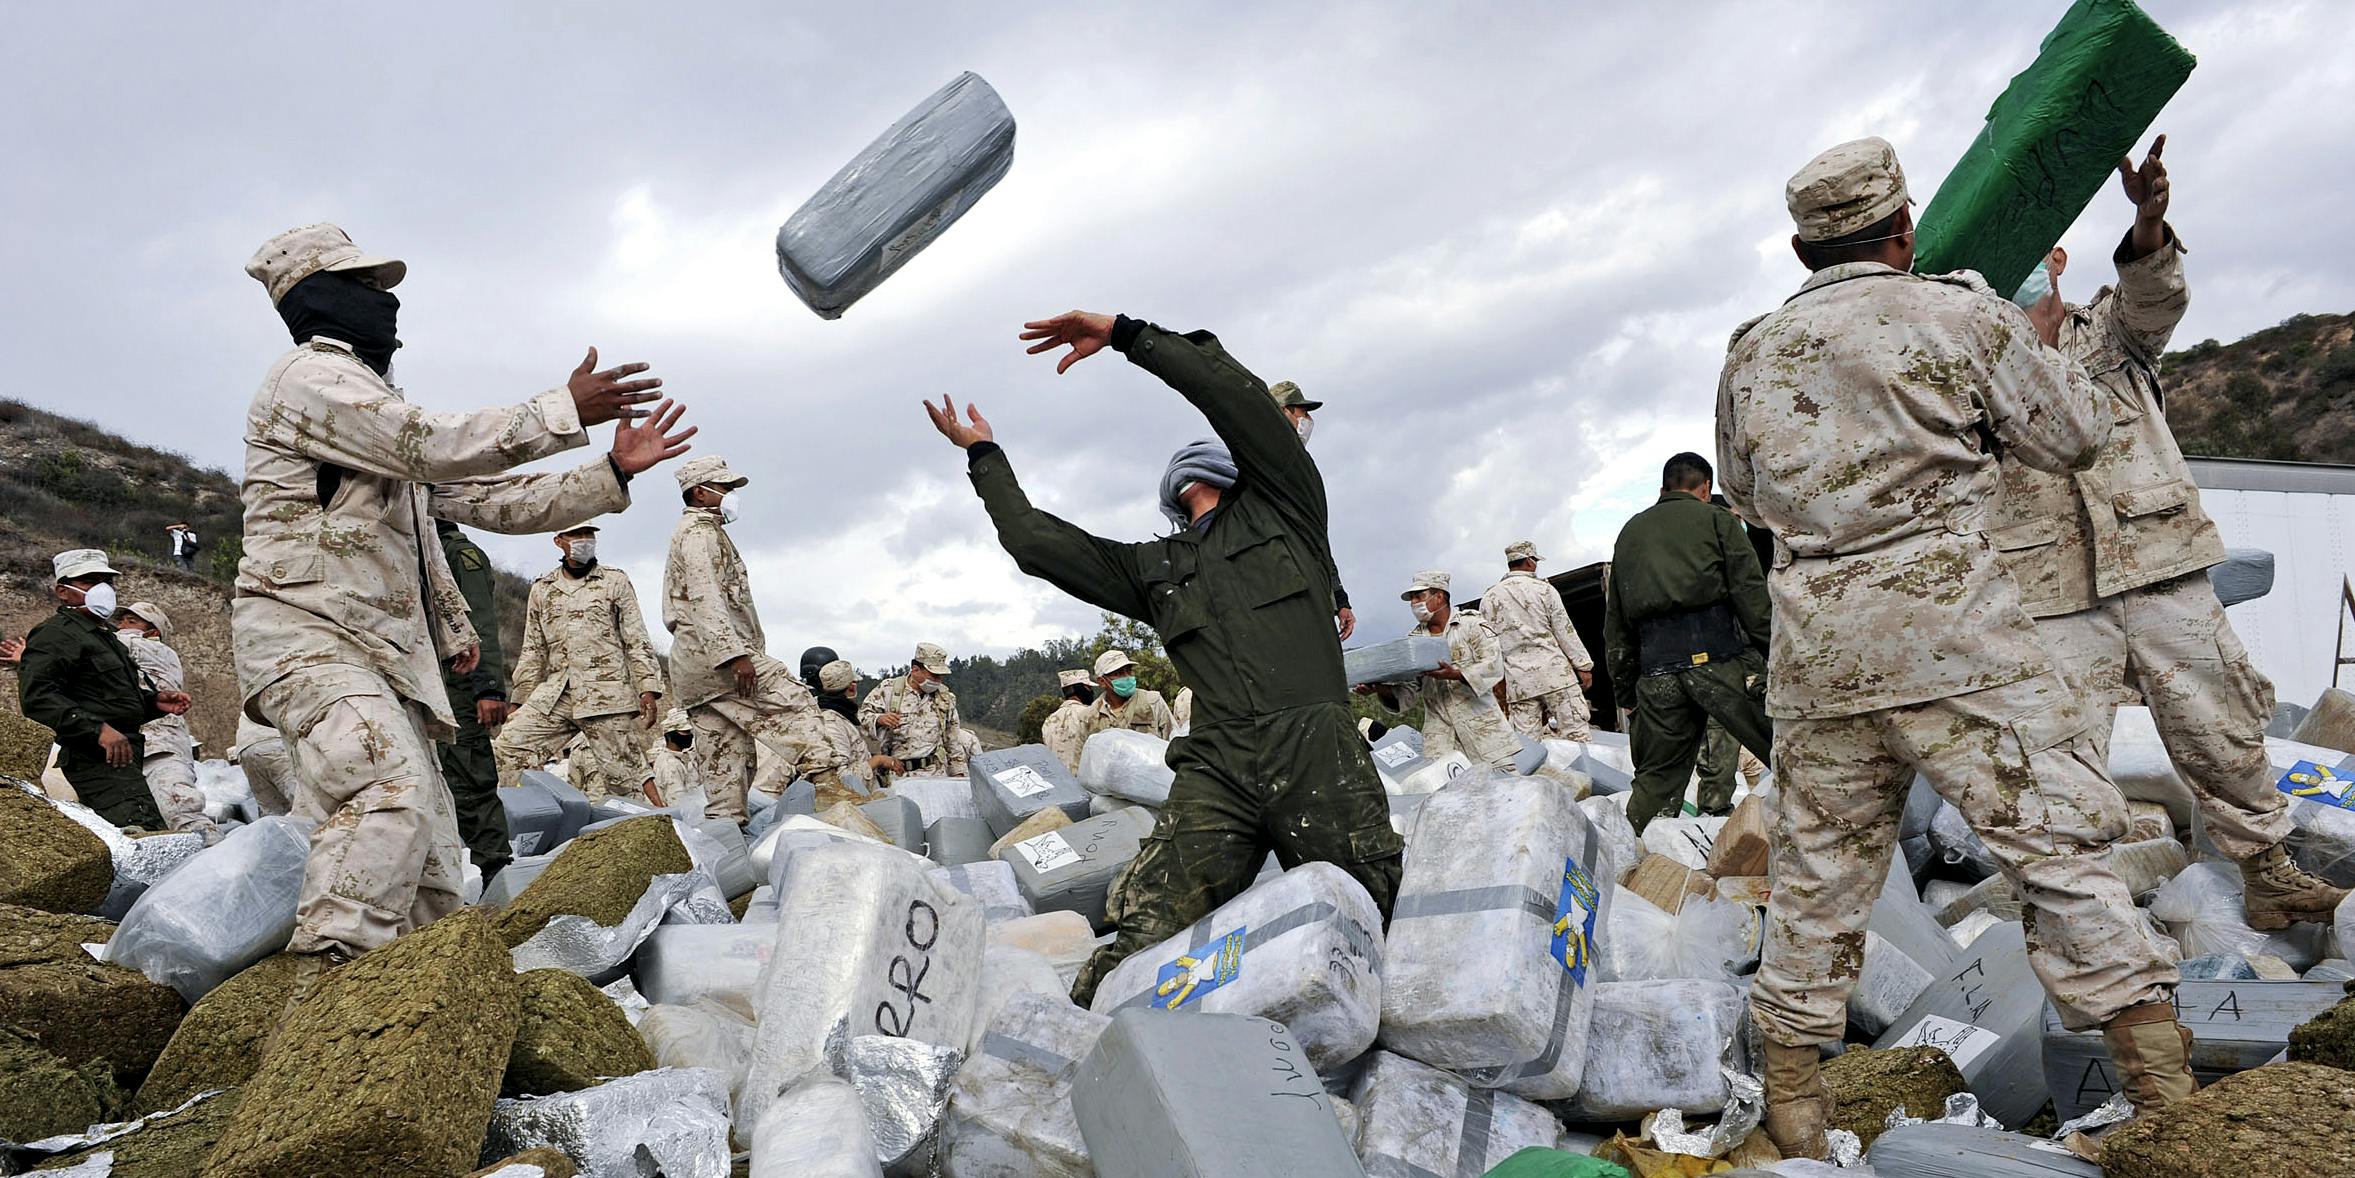 Mexican soldiers unload bundles of seized marijuana before incinerating the drugs at a military base in Tijuana, Mexico, on Wednesday, Oct. 20, 2010. Authorities carried out the biggest marijuana bust in Mexico's history this week when approximately 134 tons of marijuana headed for the U.S. was confiscated by soldiers and police. Mexico has impounded more than 7,400 tons of marijuana this year as part of President Felipe Calderon's fight against drug cartels.